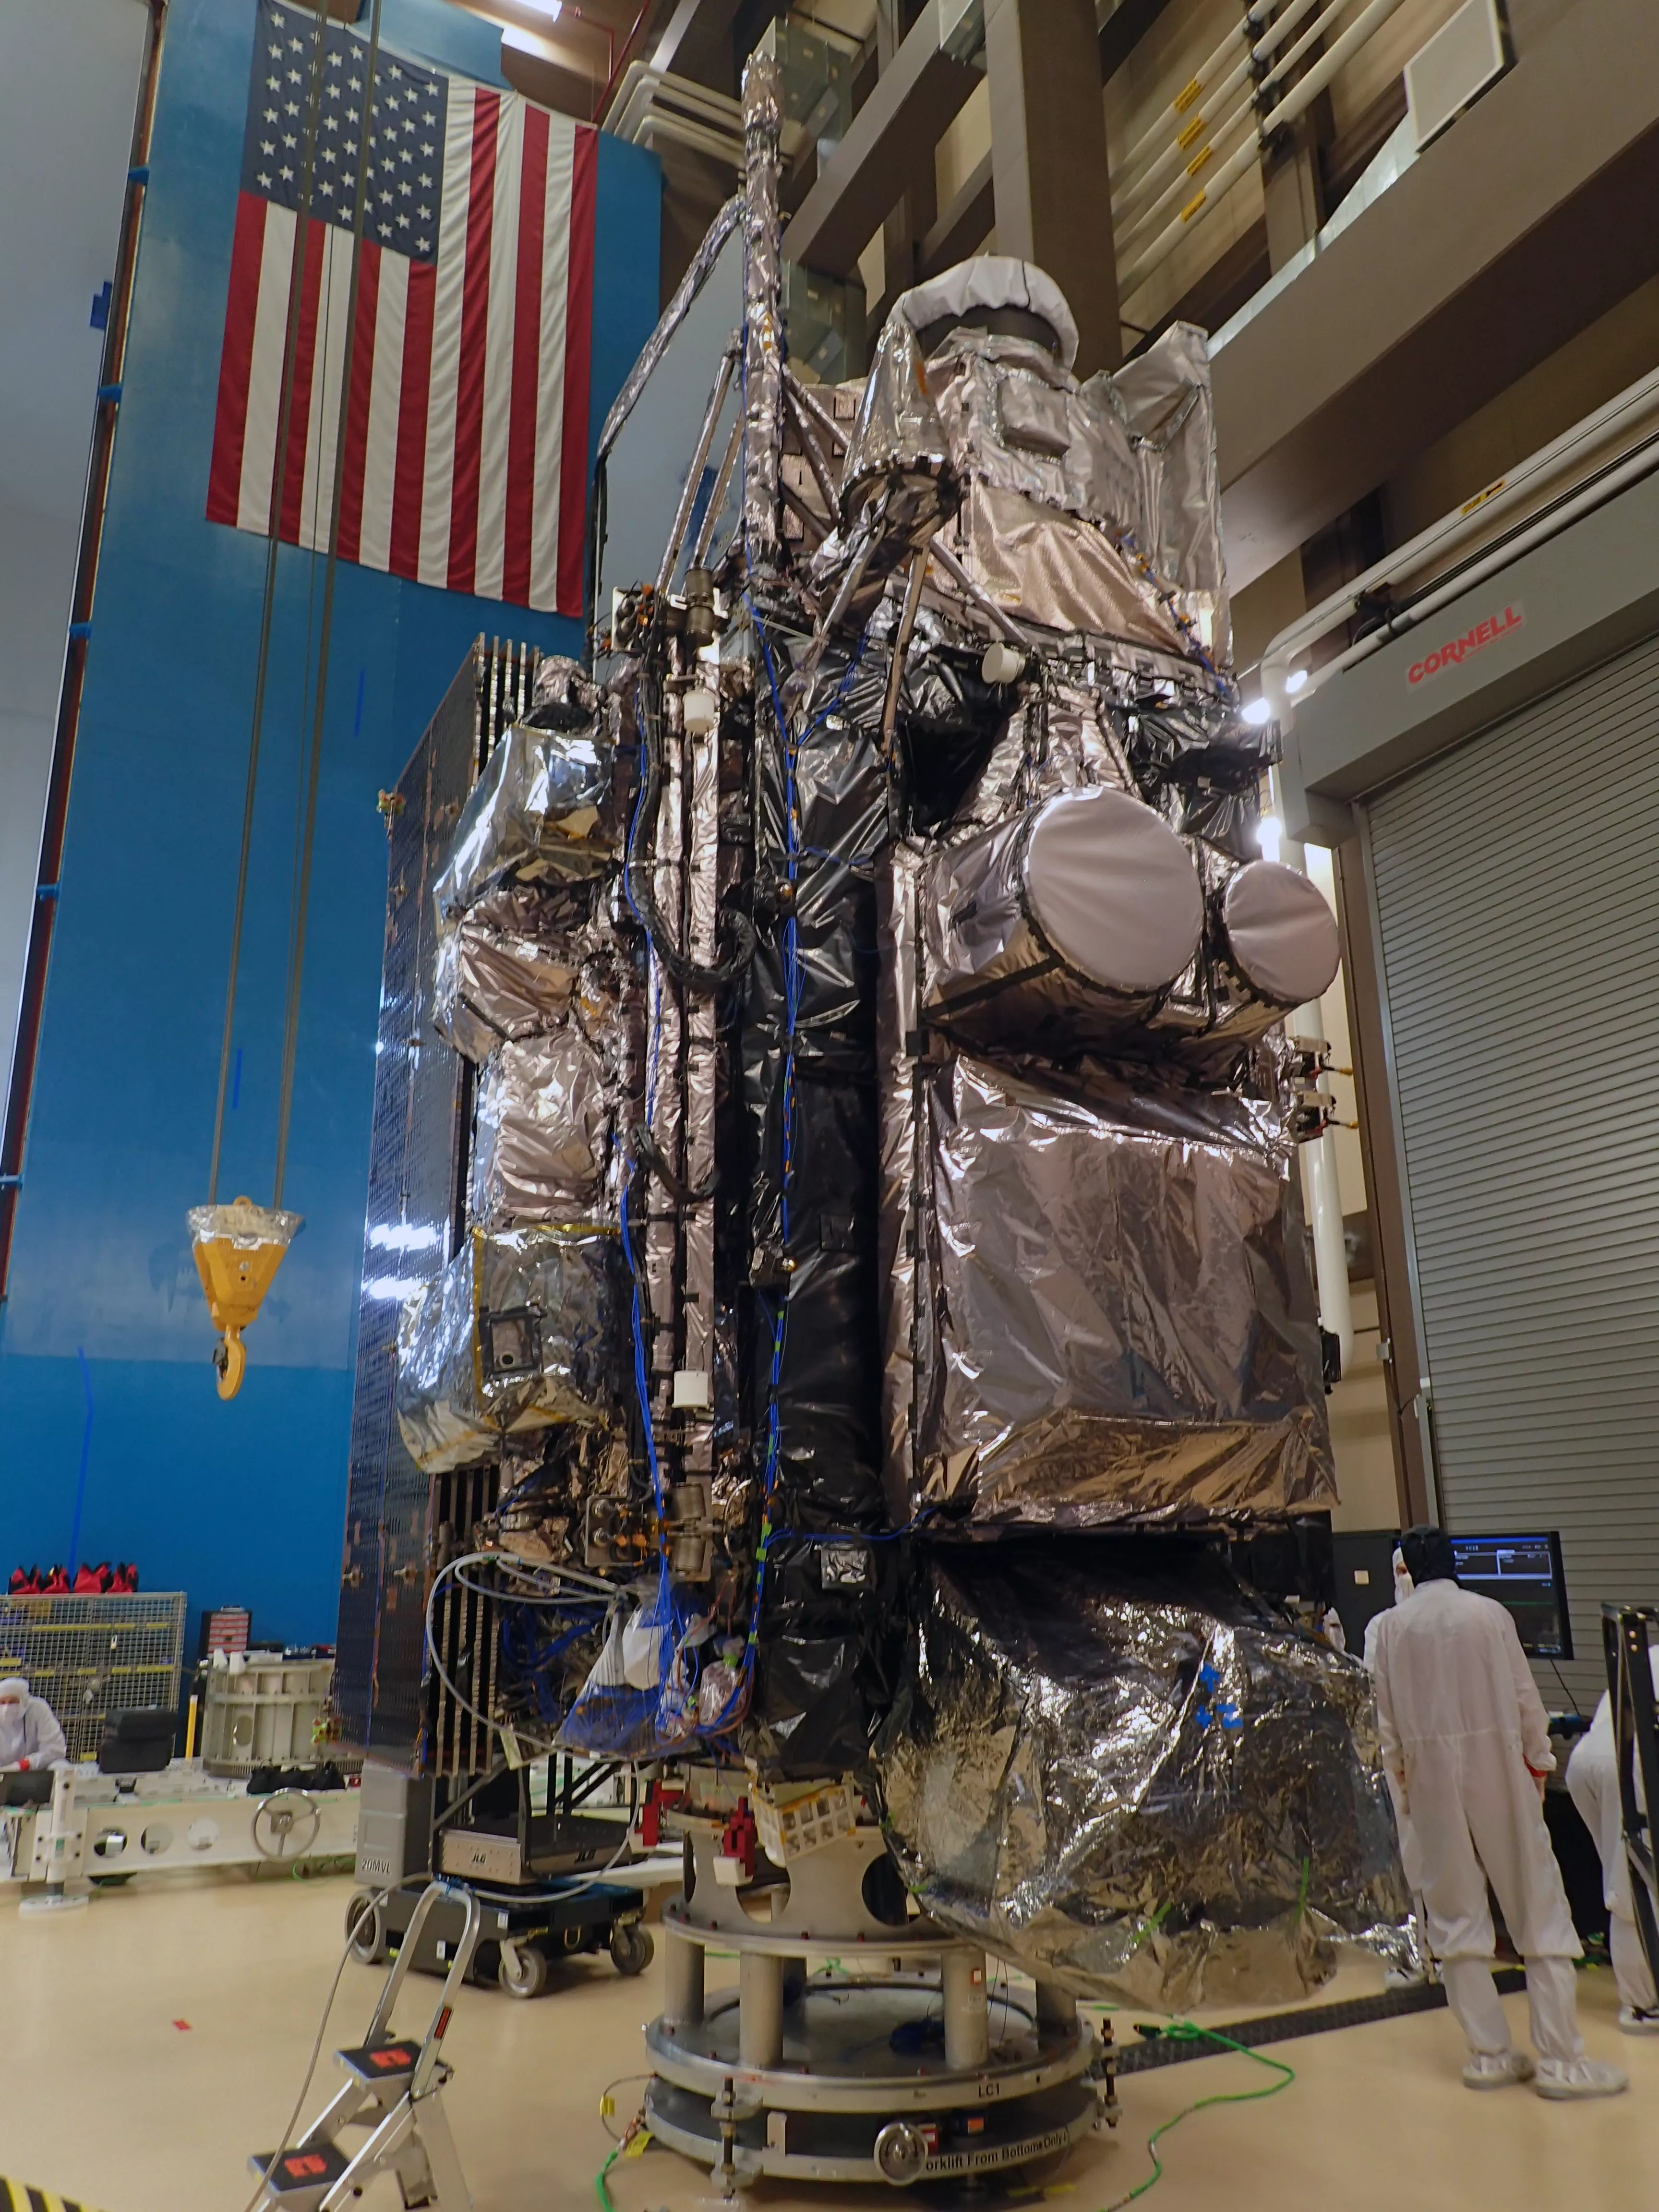 GOES-T perched on a pedestal in a clean room, wrapped in silver thermal blankets. 